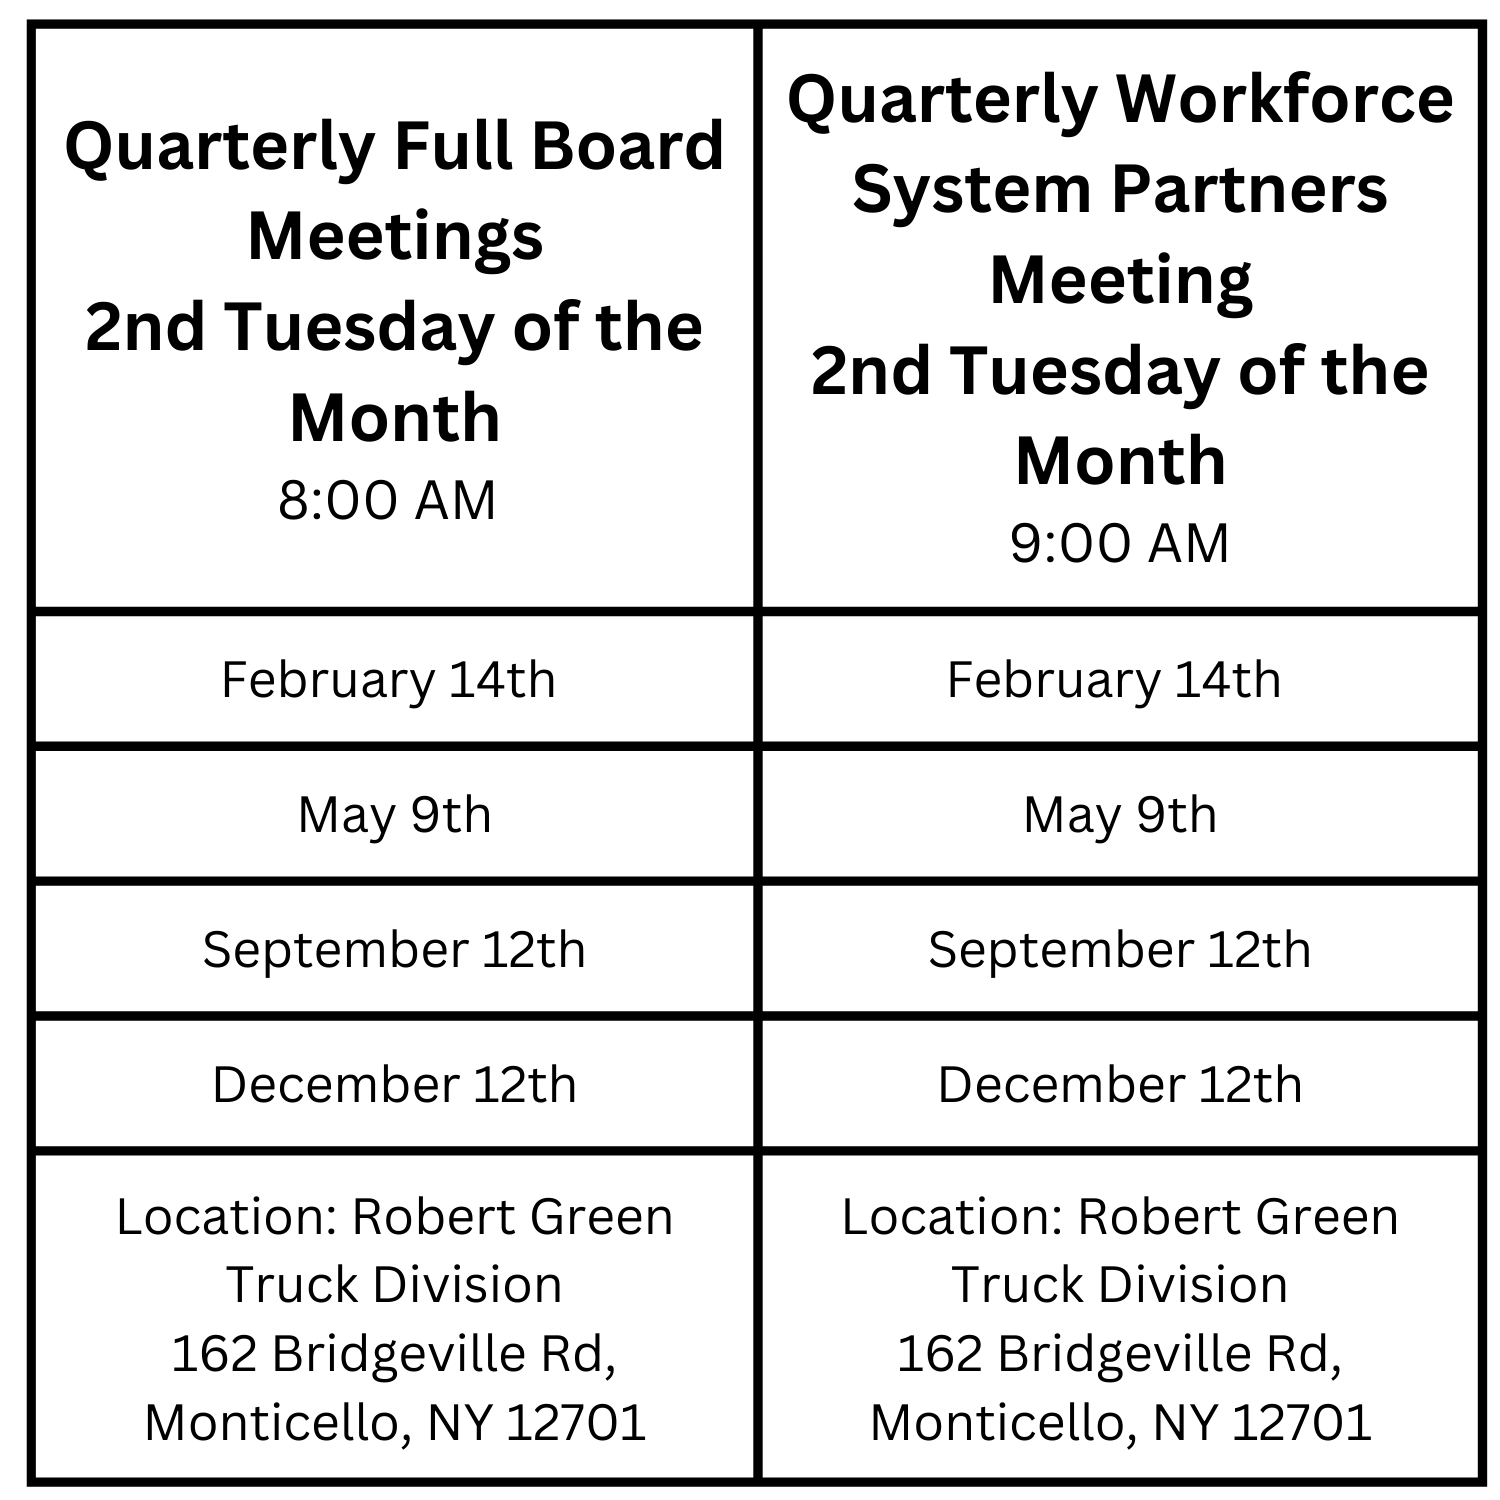 Quarterly%20Full%20Board%20Meetings%202nd%20Tuesday%20of%20the%20Month%20800%20AM.png